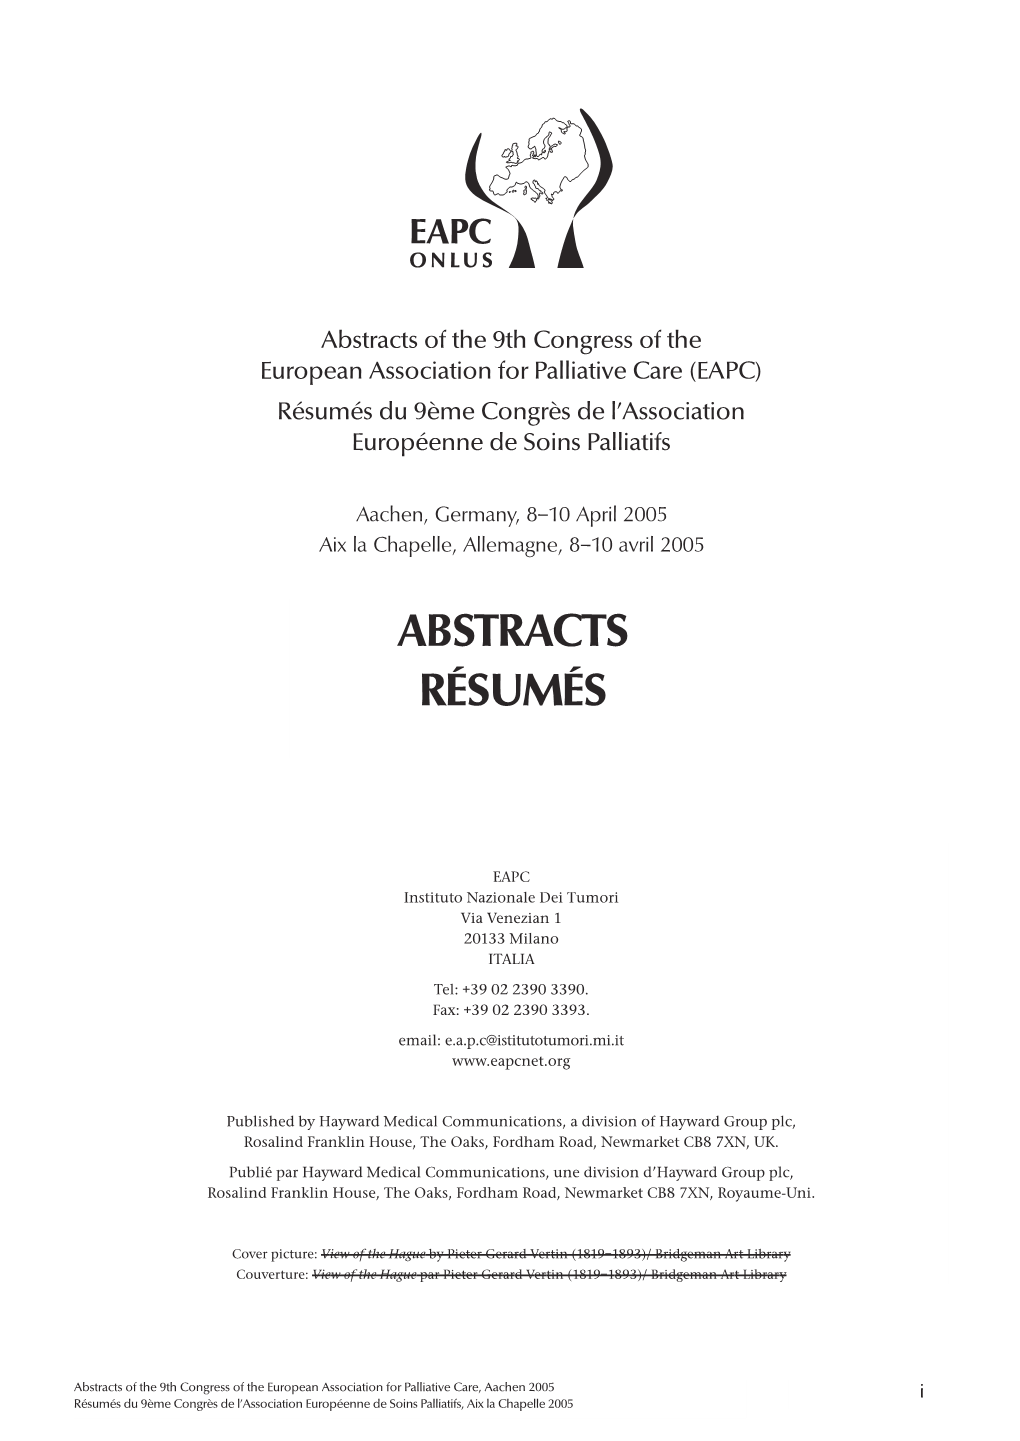 Congress Abstracts